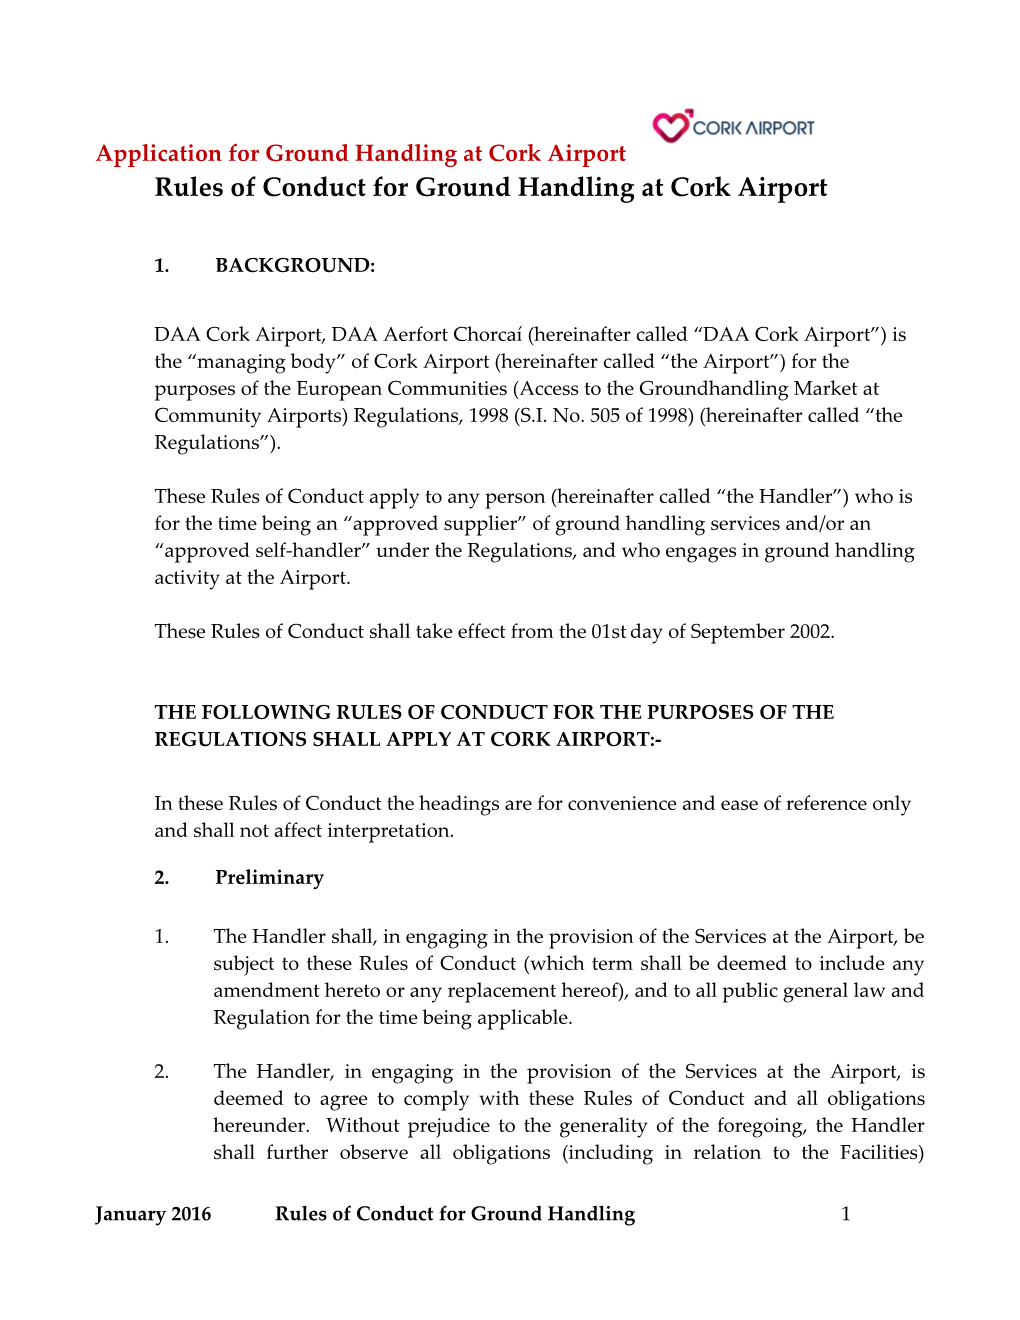 Rules of Conduct for Ground Handling at Cork Airport